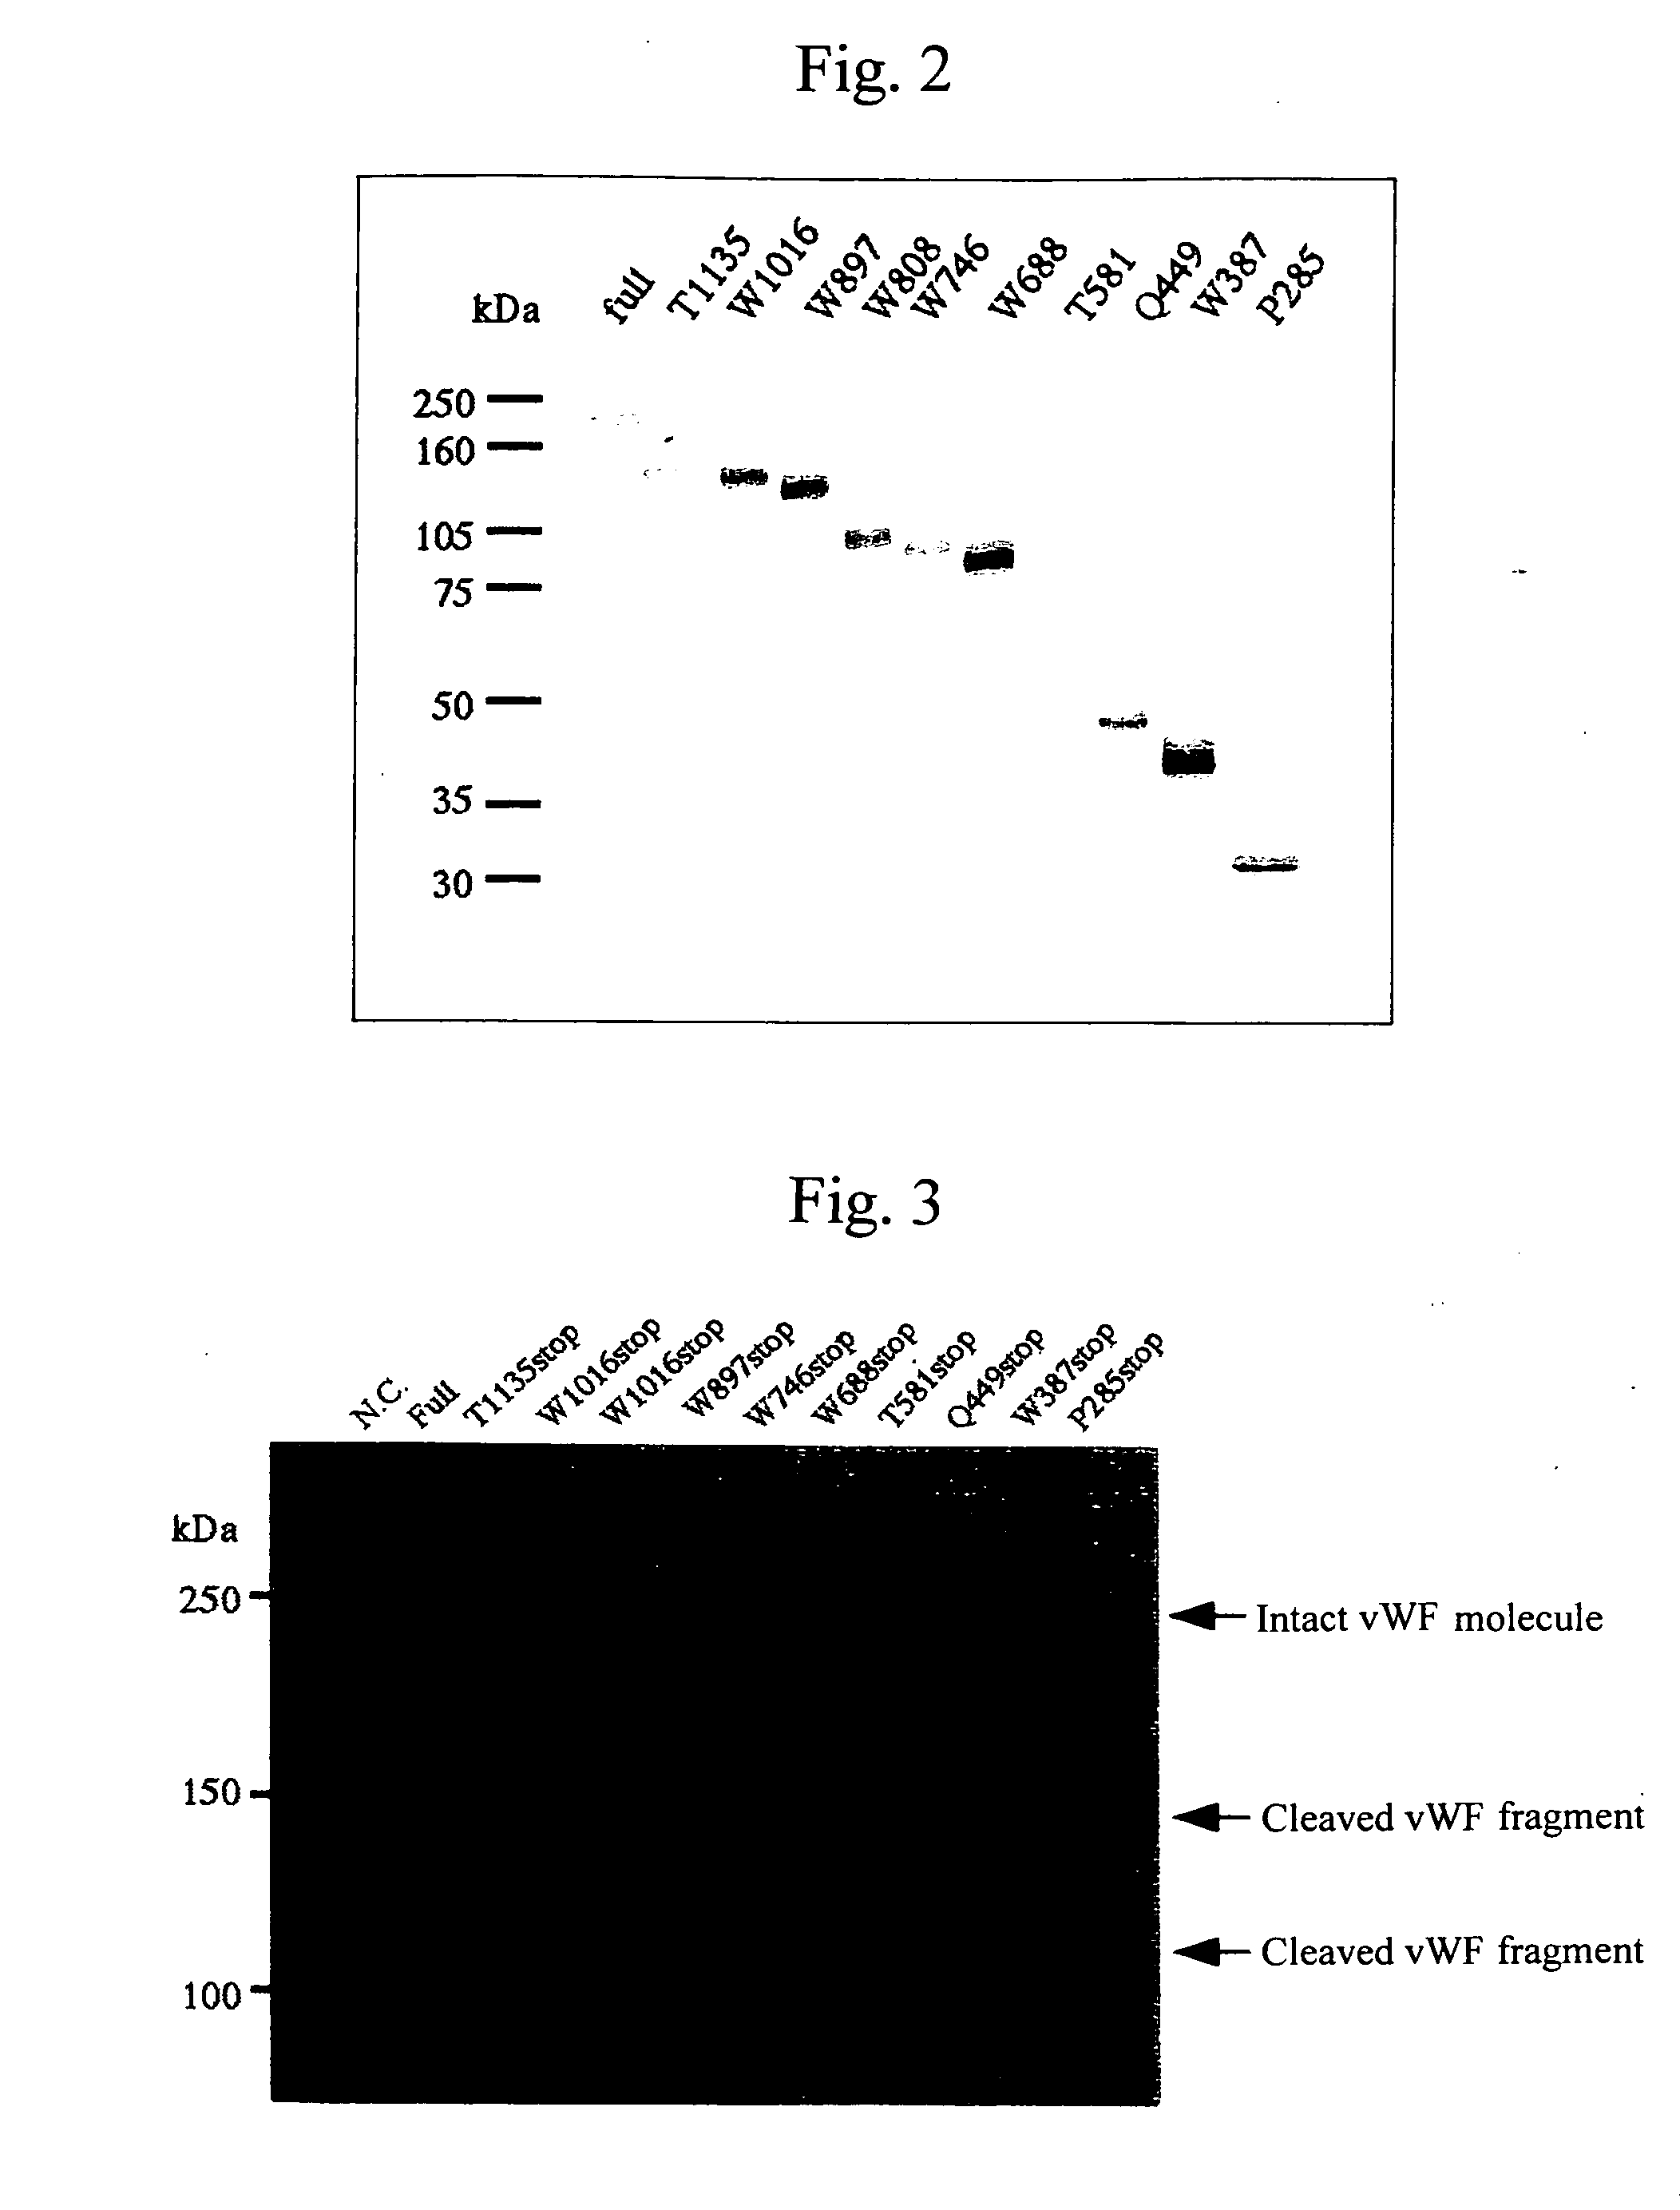 Antibody against enzyme specifically cleaving von villebrand factor and assay system using the same